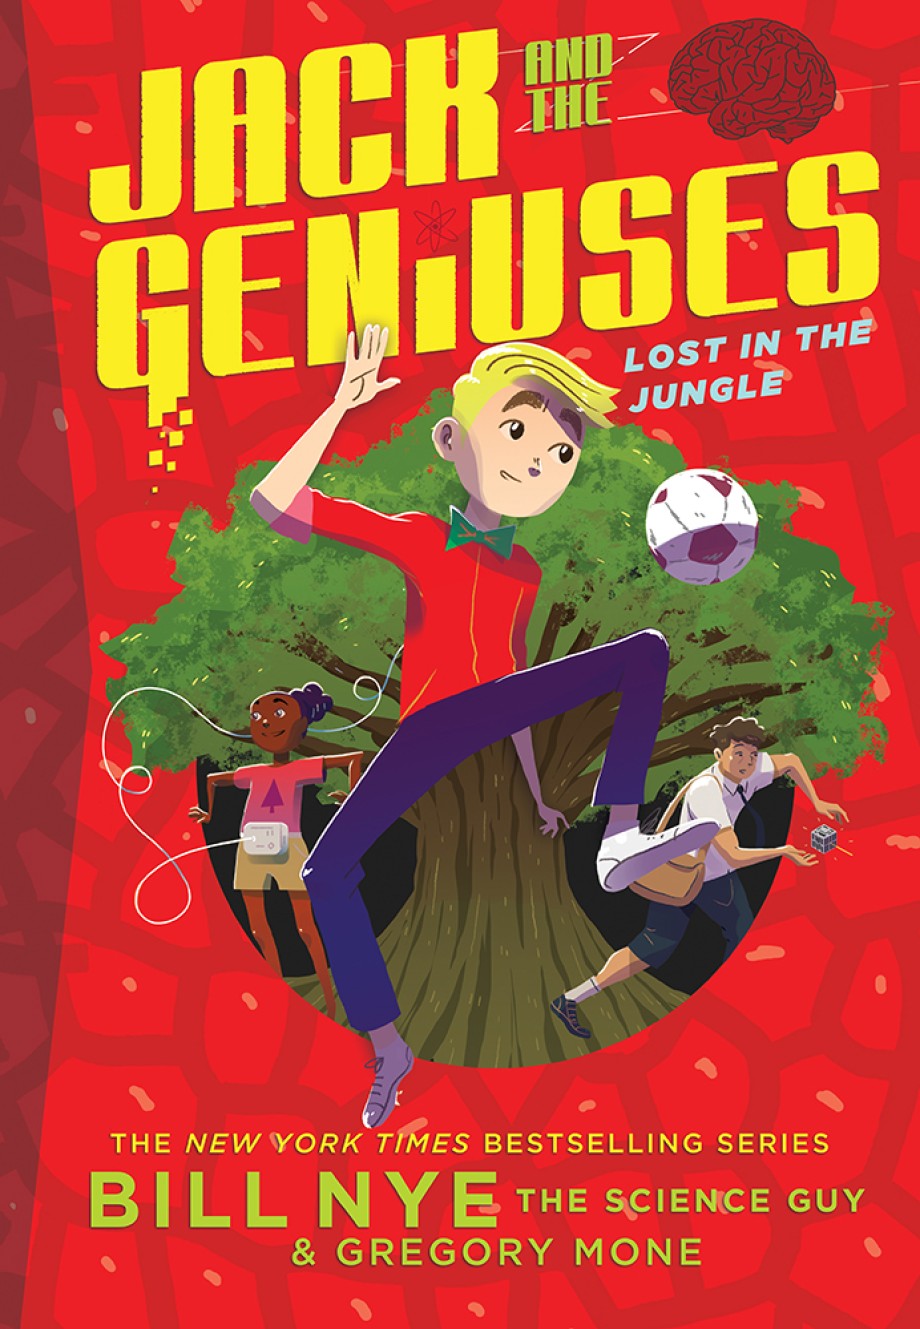 Lost in the Jungle Jack and the Geniuses Book #3